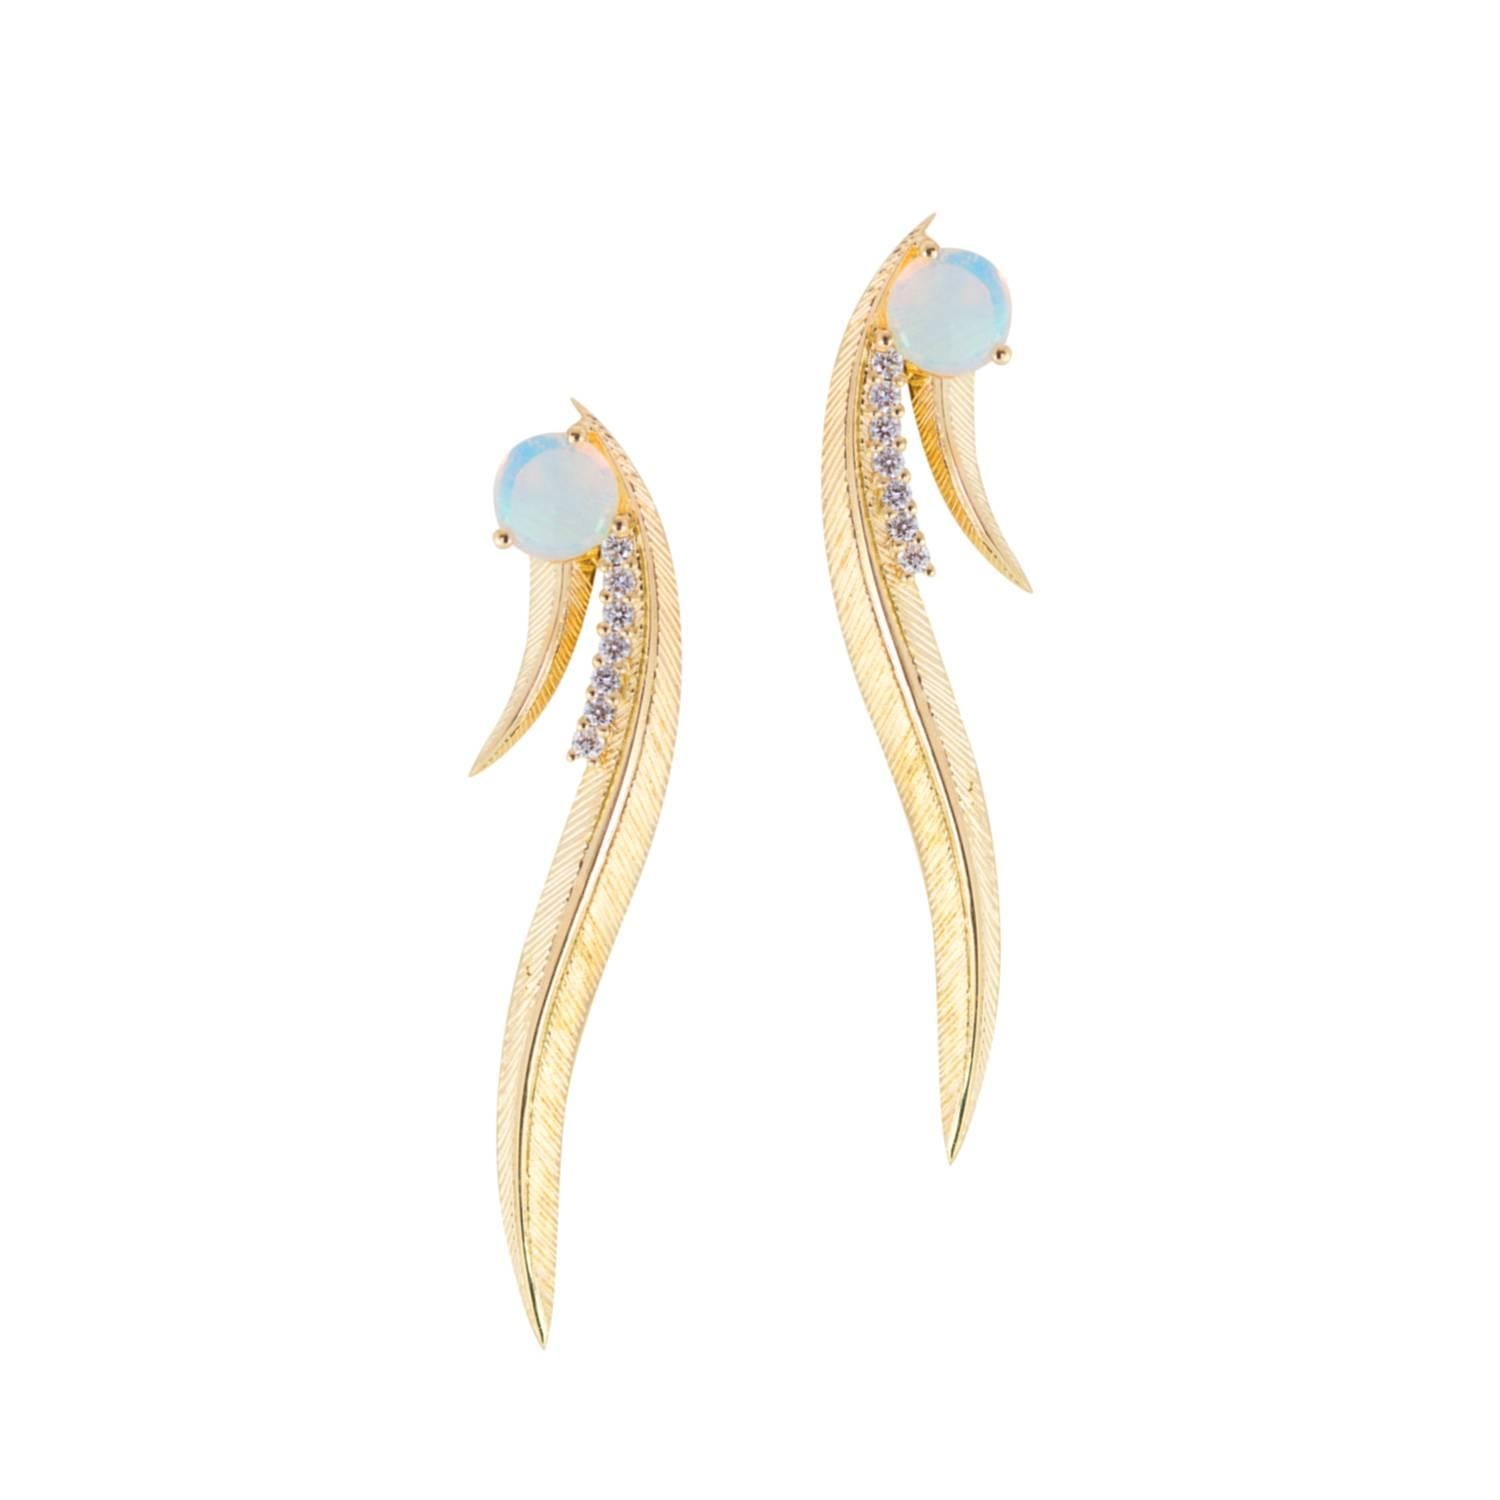 Showpiece Phoenix Ear Climbers are a reworking of a heritage Daou design from the 1970s, once described as ‘Wonder woman earrings!’ both strong and feminine. Accents of hand-selected luminous opals finish the sleek feather design with hand textured